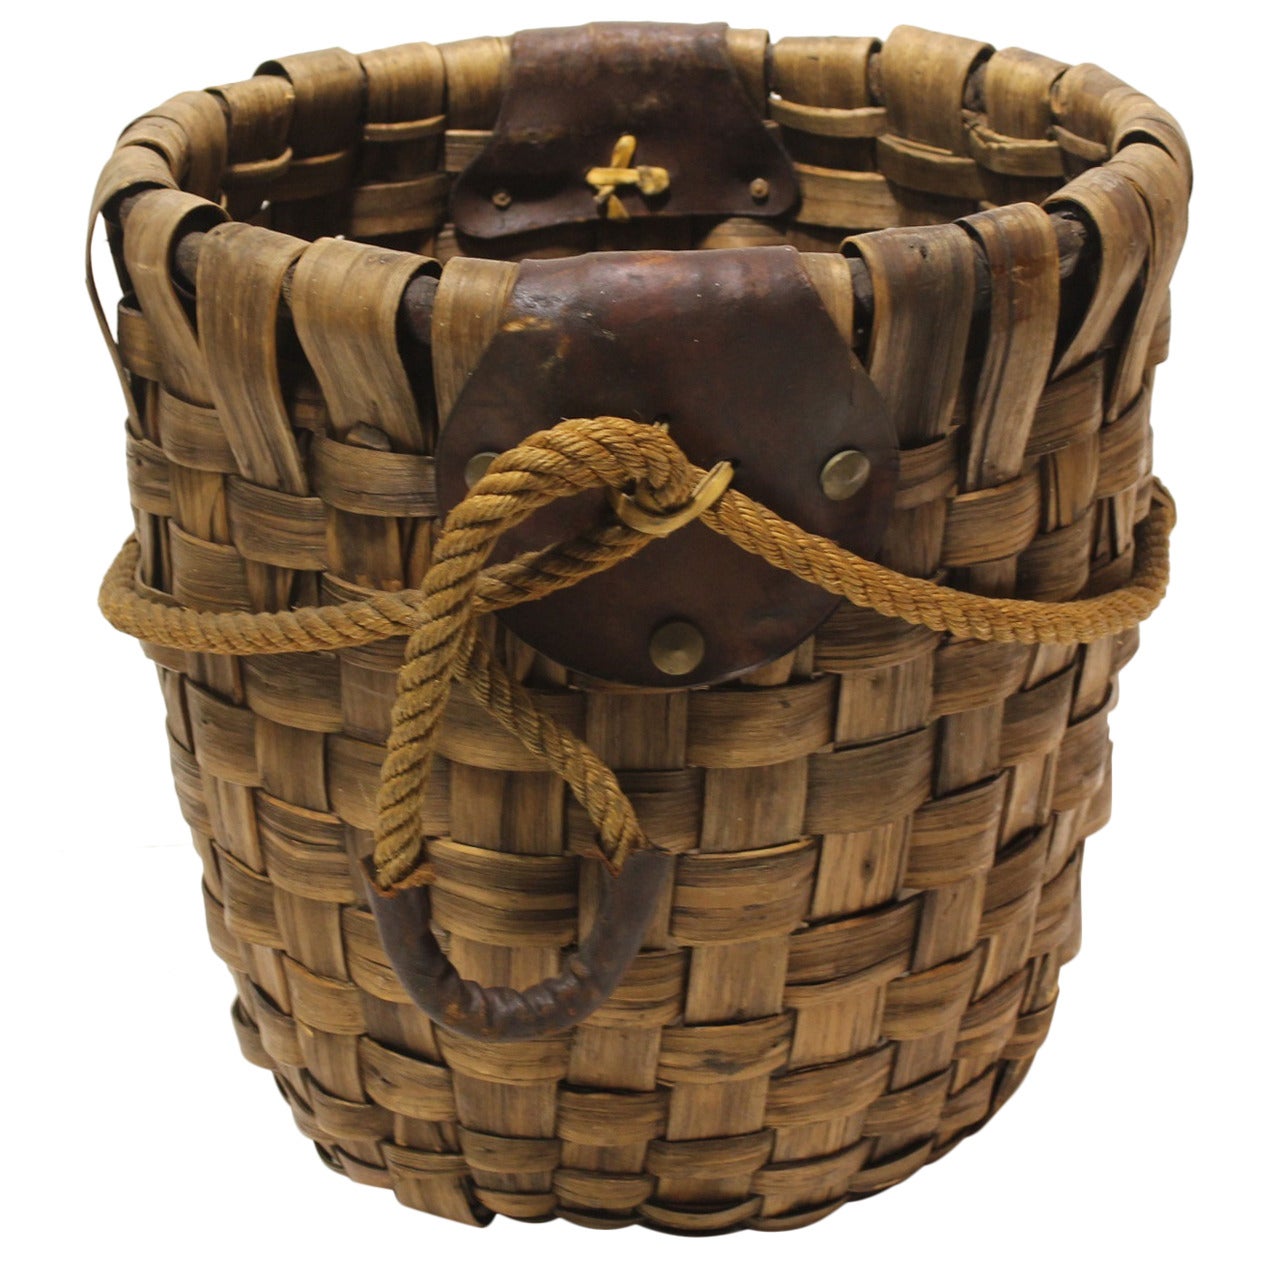 Large Woven Rustic Basket with Leather Handles